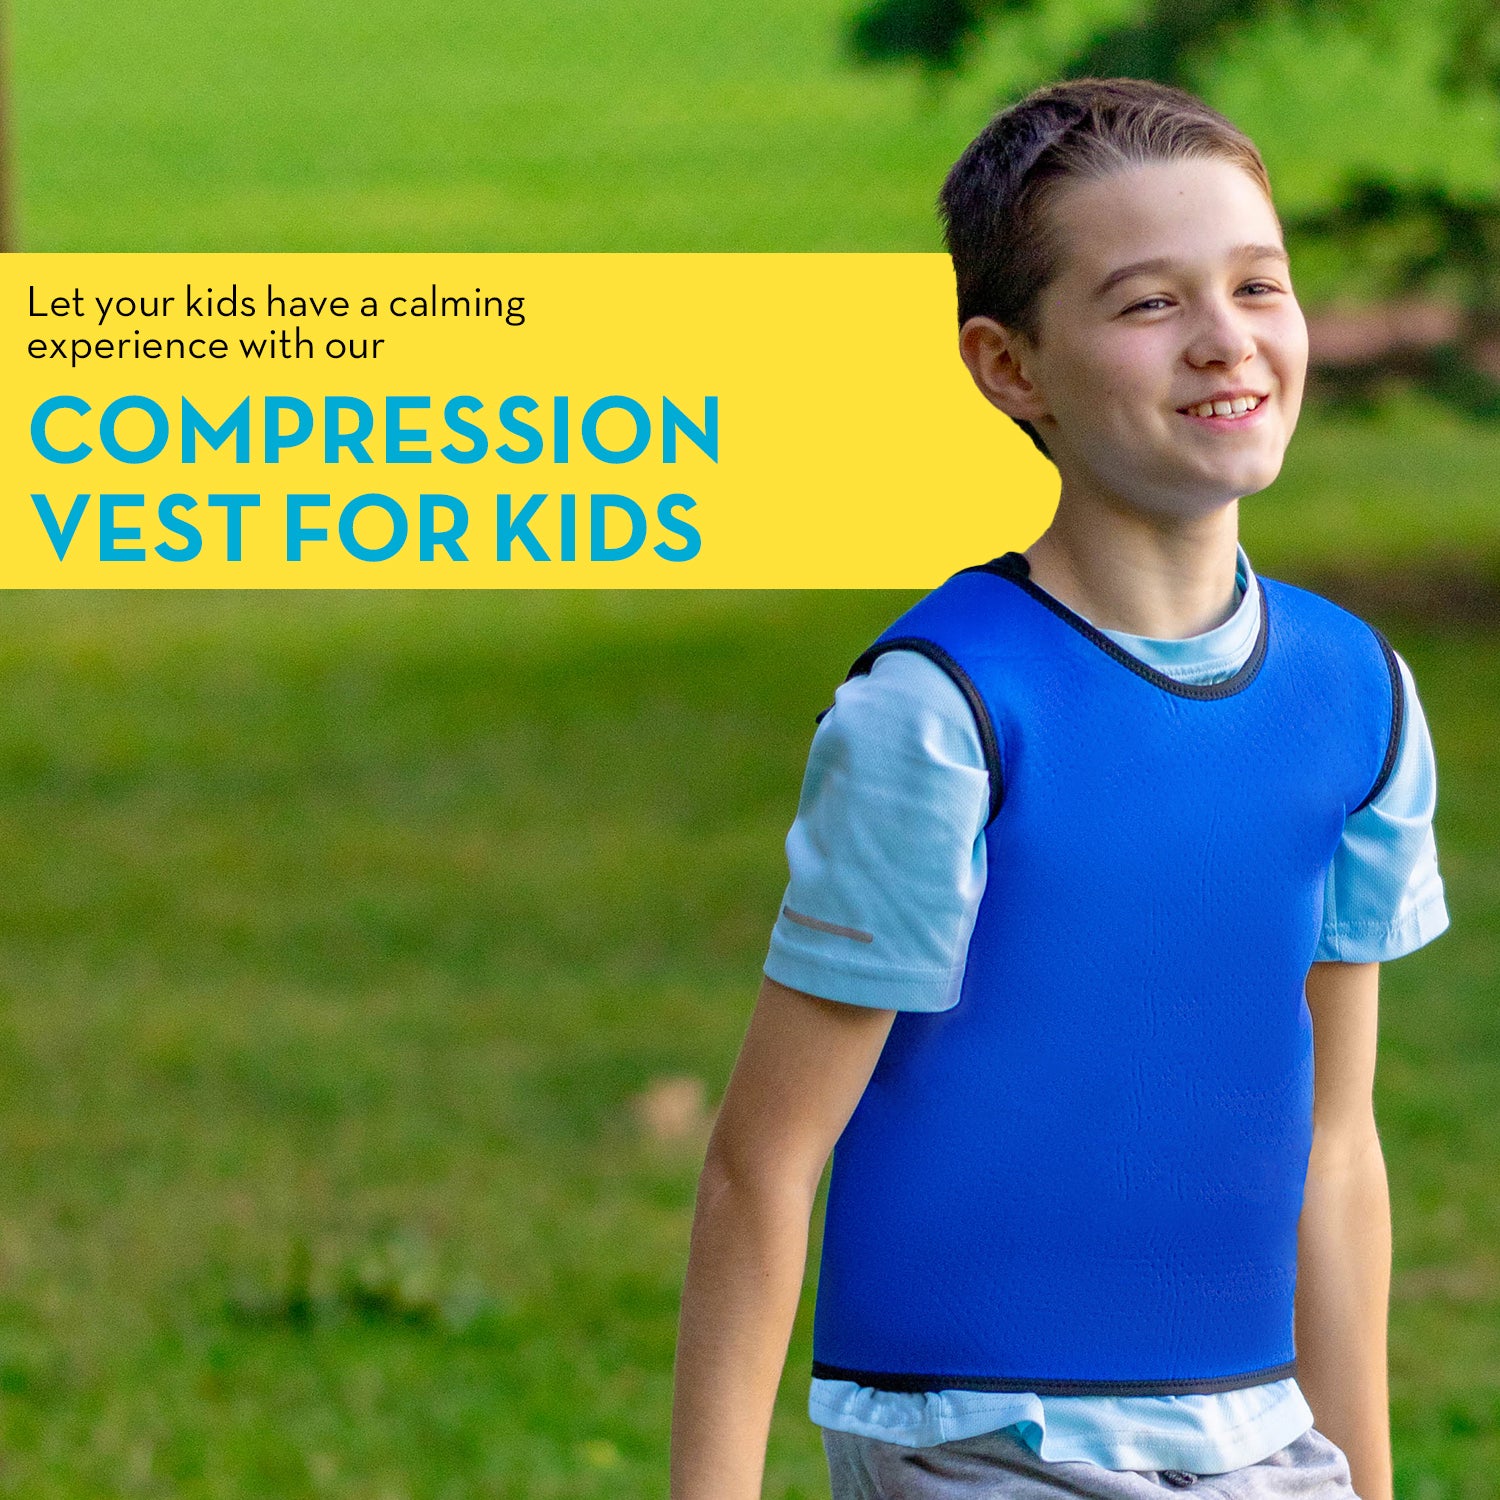 Compression Vest For kids Compression Vest for Kids with Autism, Sensory Compression Vest for Kids with Processing Disorders, ADHD, and Autism, Calming and Supportive